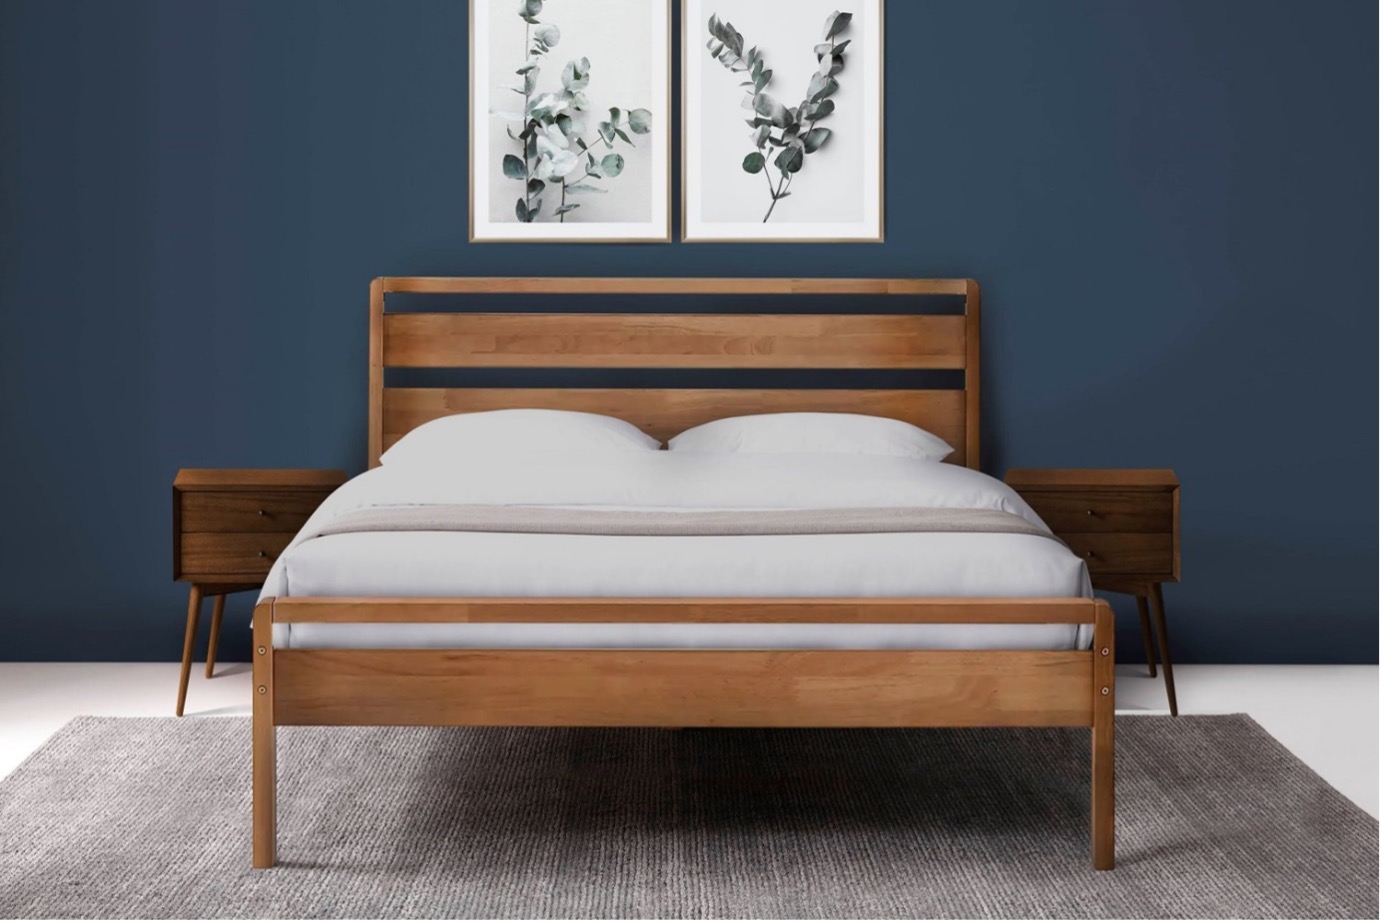 Featured Image - Image 7. Quality Mattress and Bed Frame - obodo